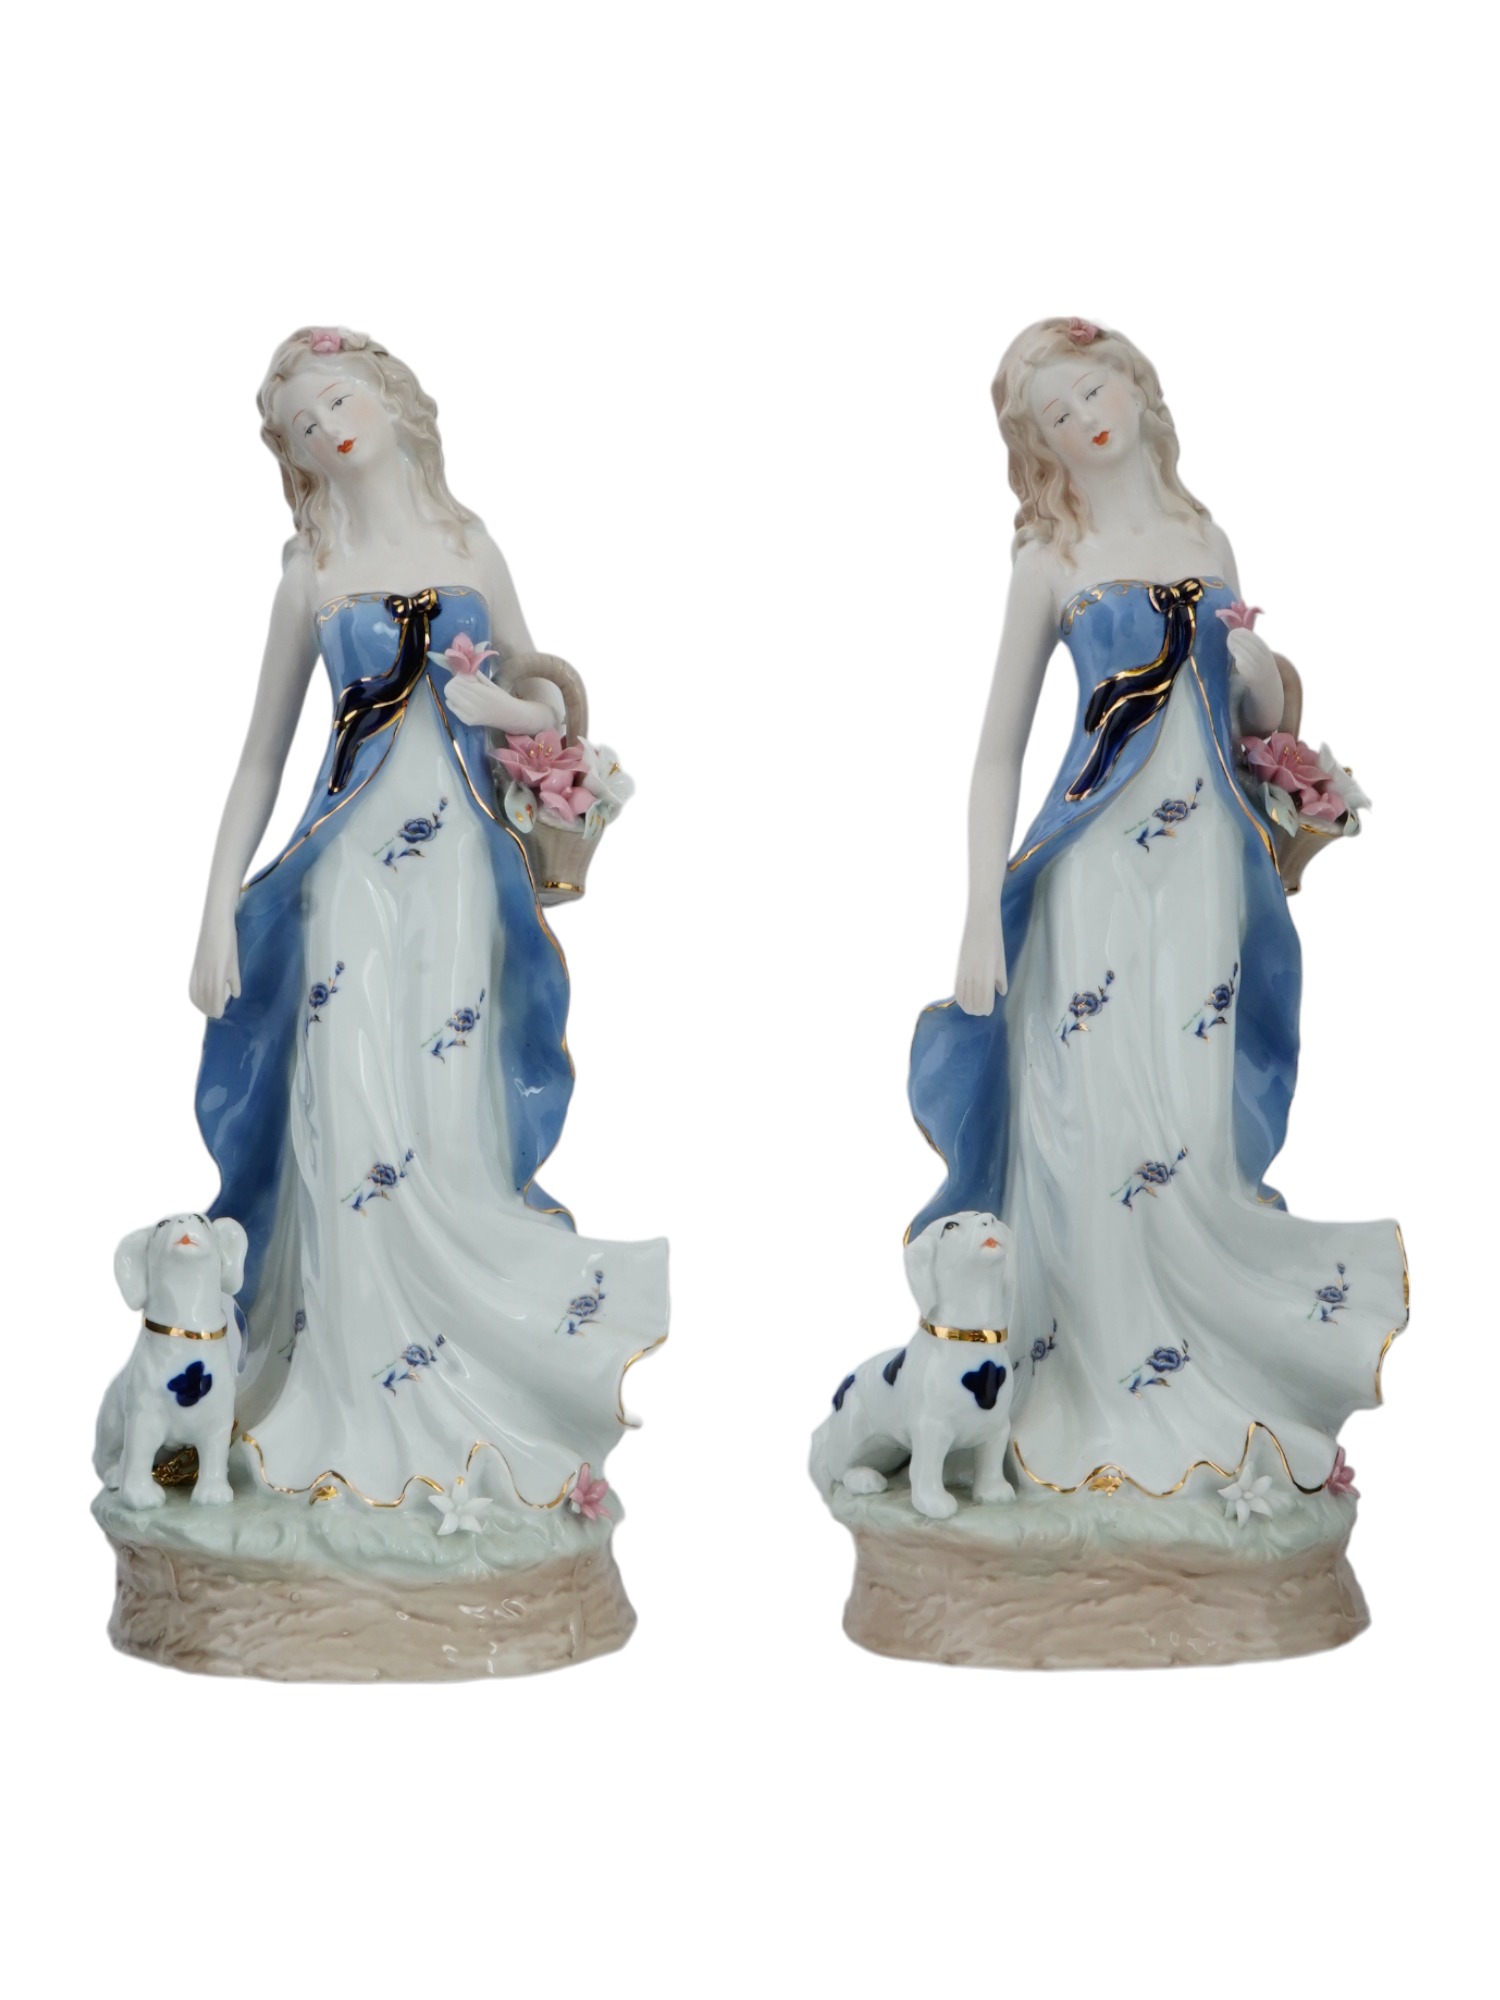 LARGE VINTAGE PORCELAIN FEMALE FIGURINES WITH DOGS PIC-0